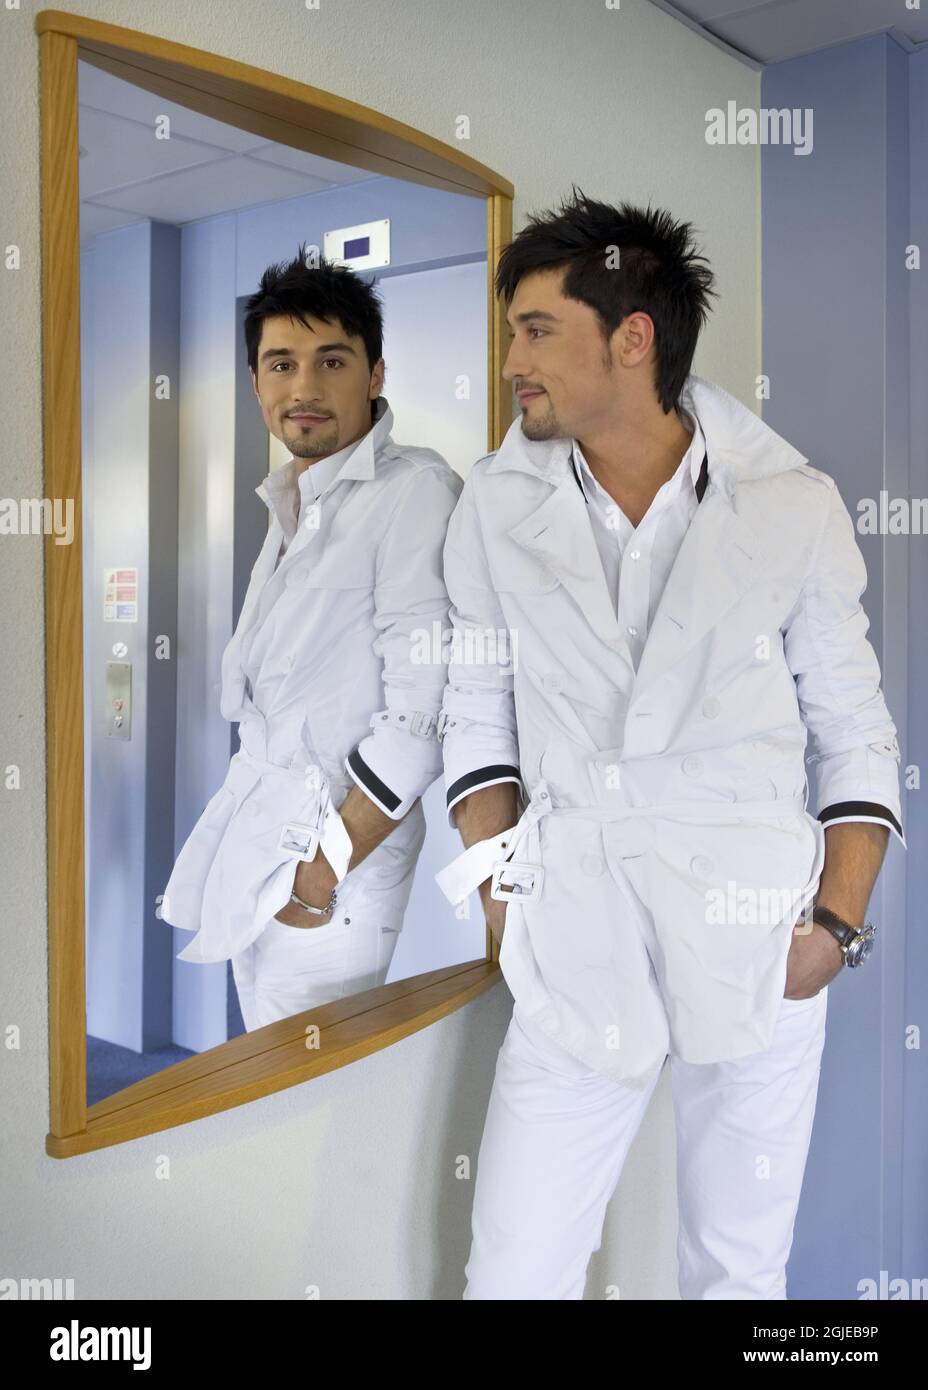 Winner of the Eurovision Song Contest 2008, Dima Bilan of Russia. Stock Photo